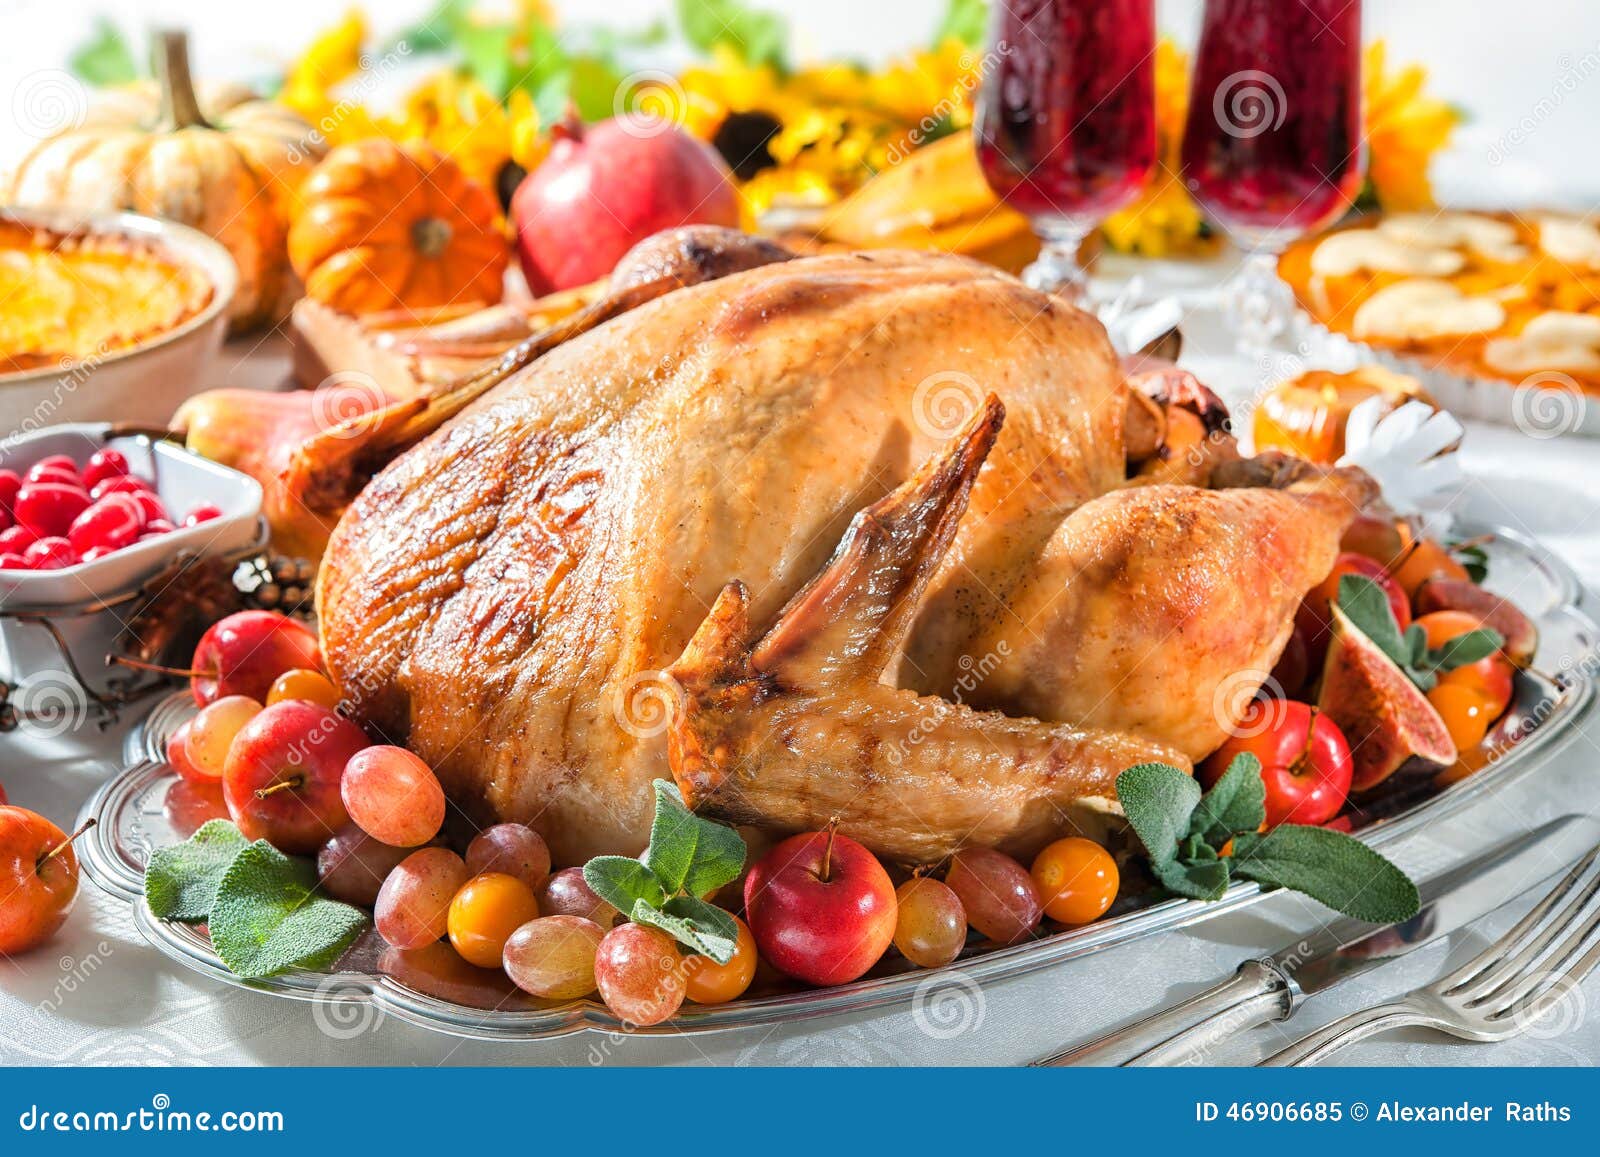 Thanksgiving turkey stock image. Image of cuisine, candle - 46906685